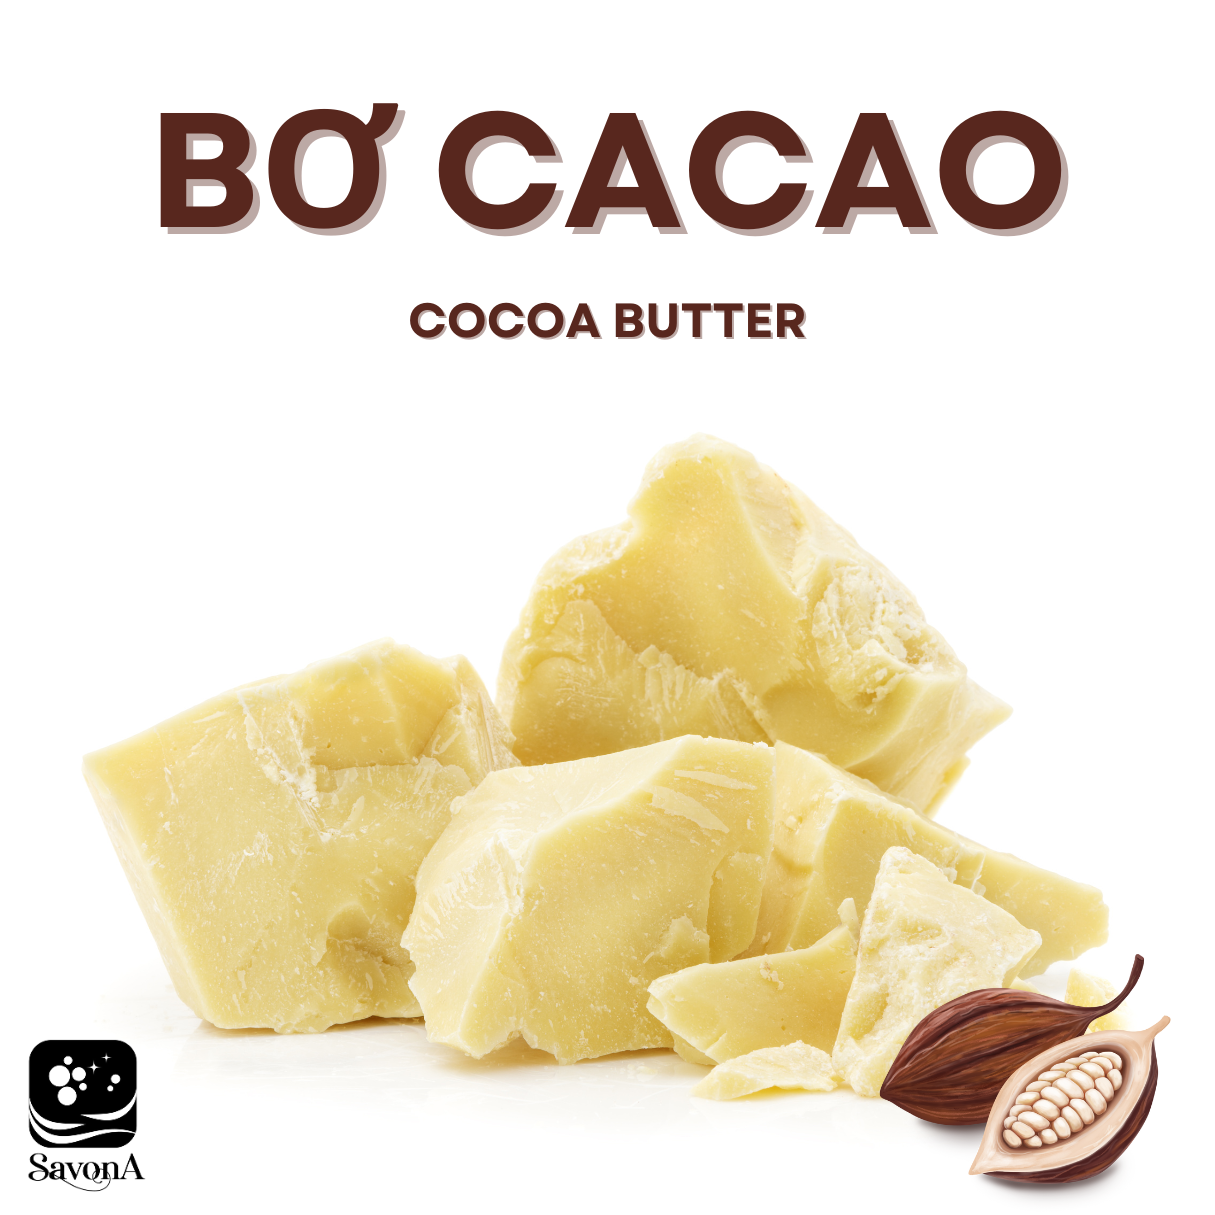 Bo-cacao-nguyen-chat-raw-cocoa-butter-savona